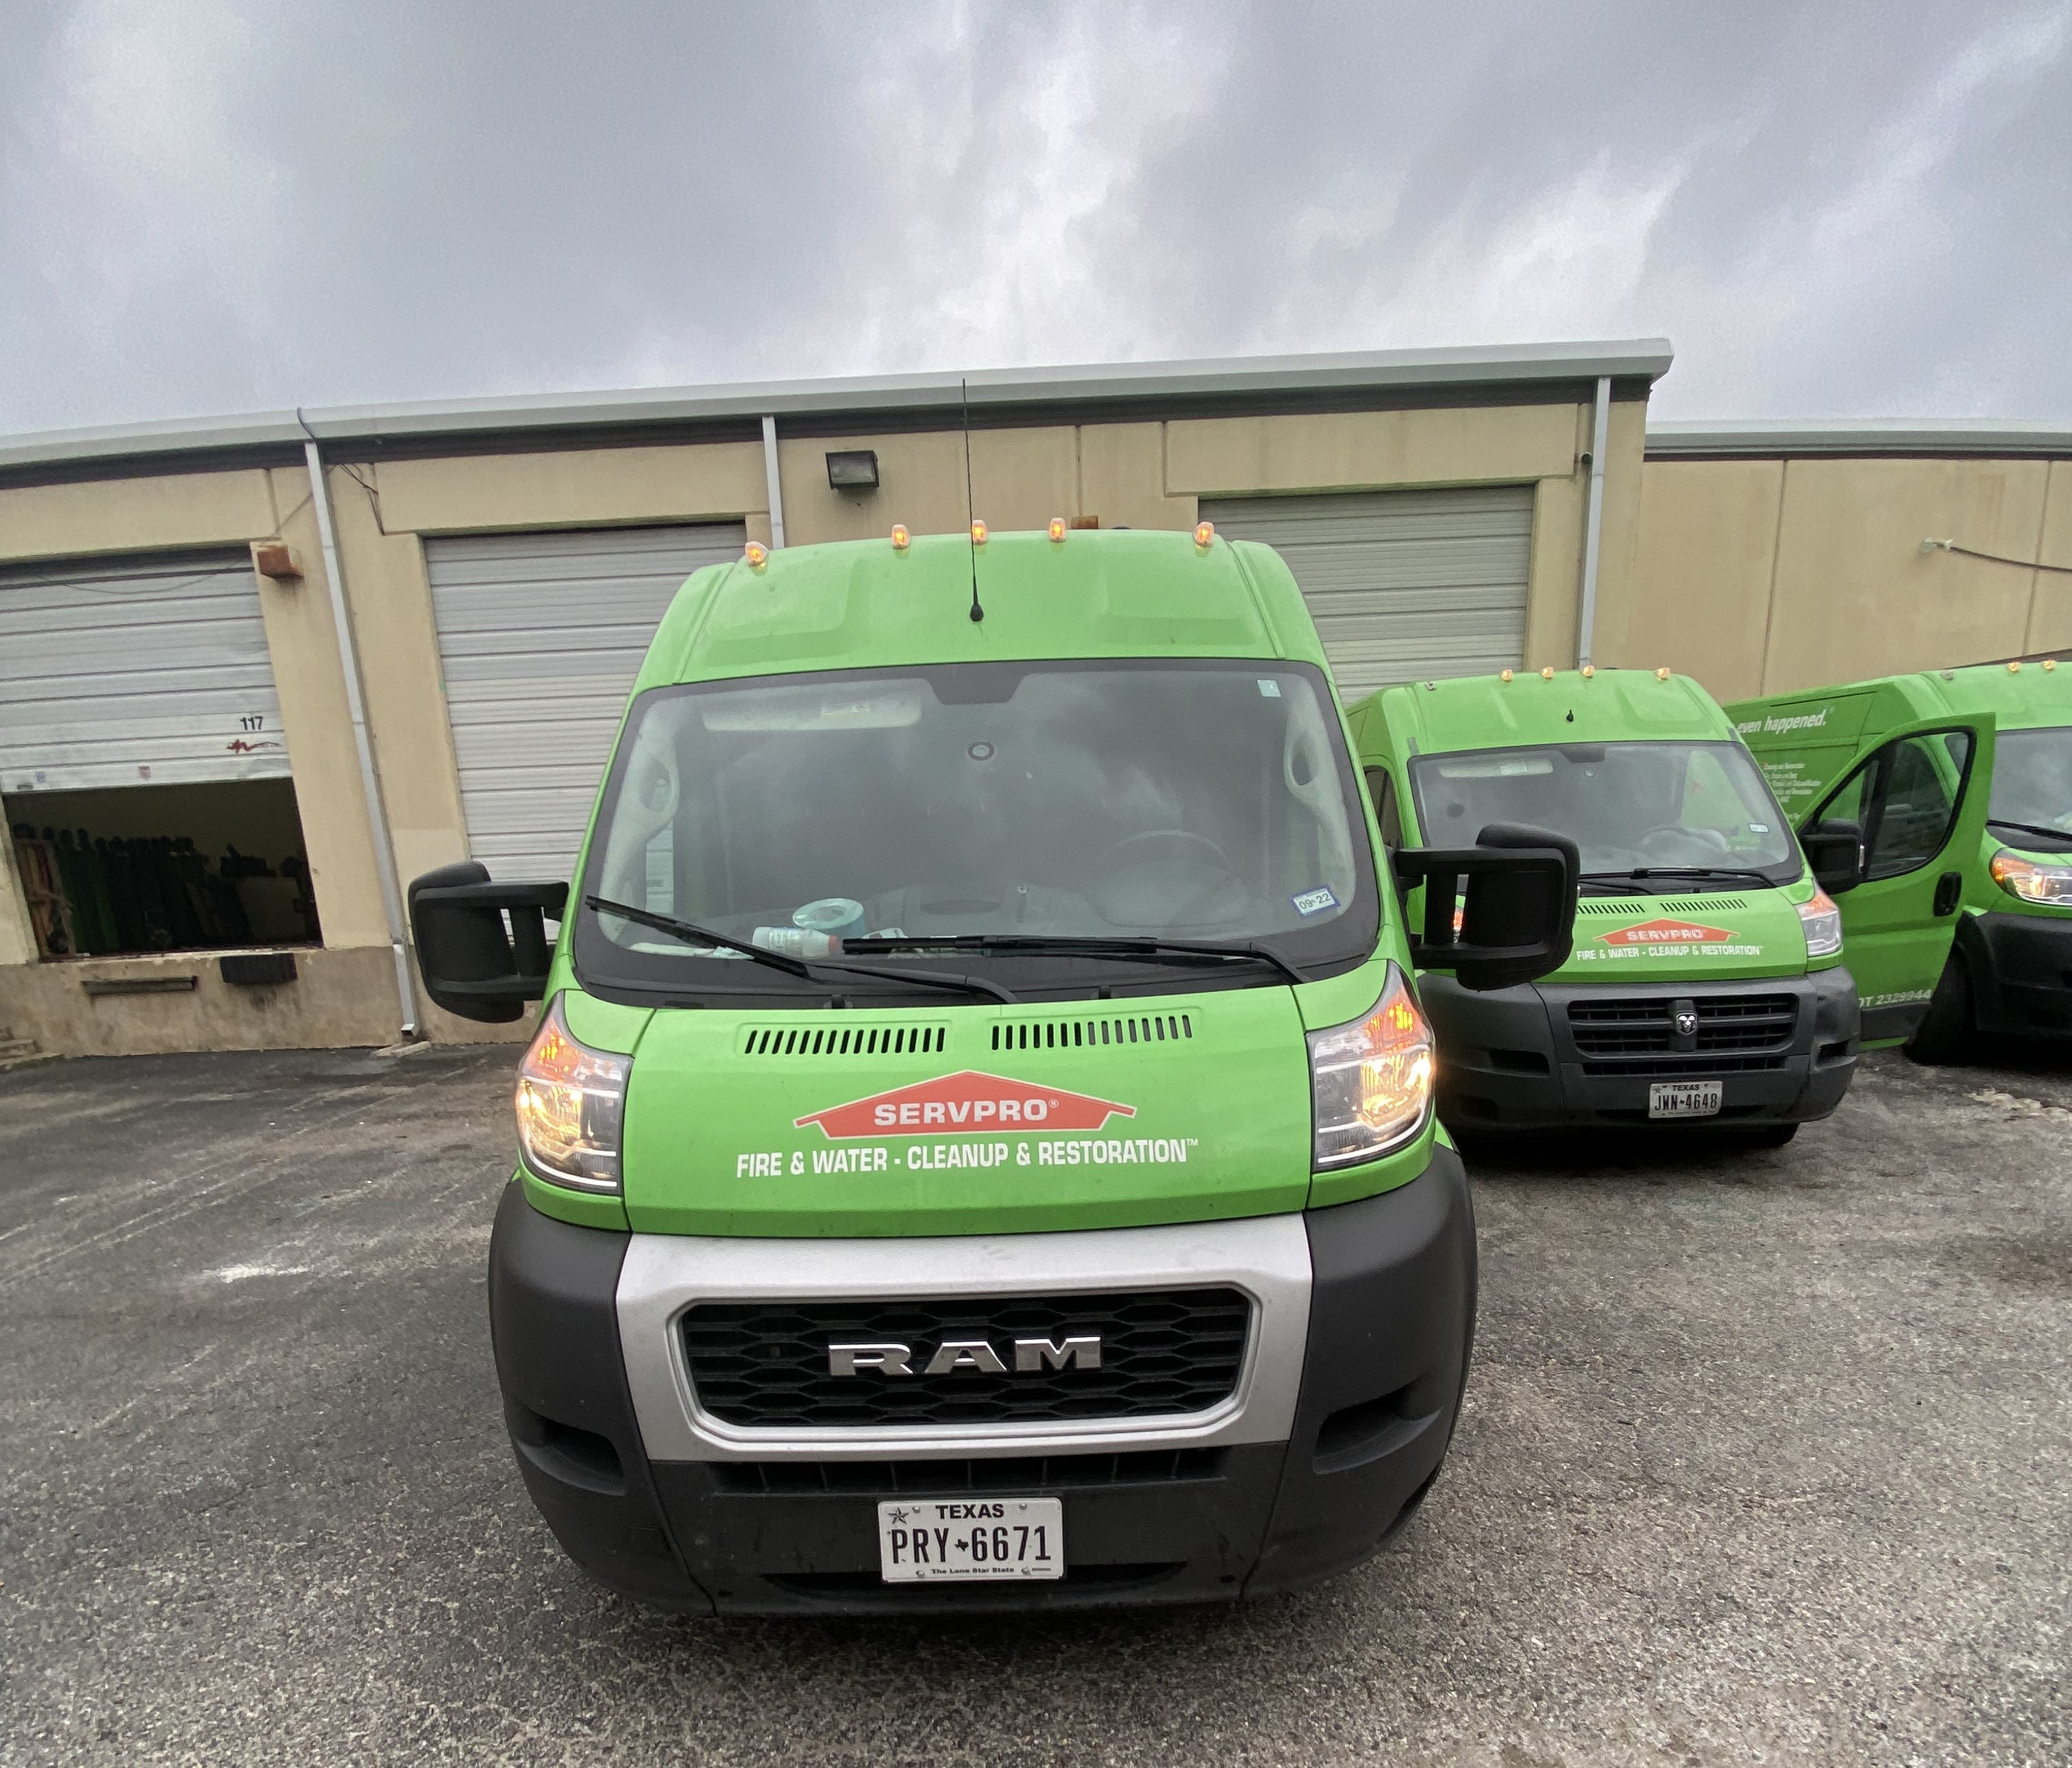 This is what the front of our SERVPRO of Medina County Vans look like.